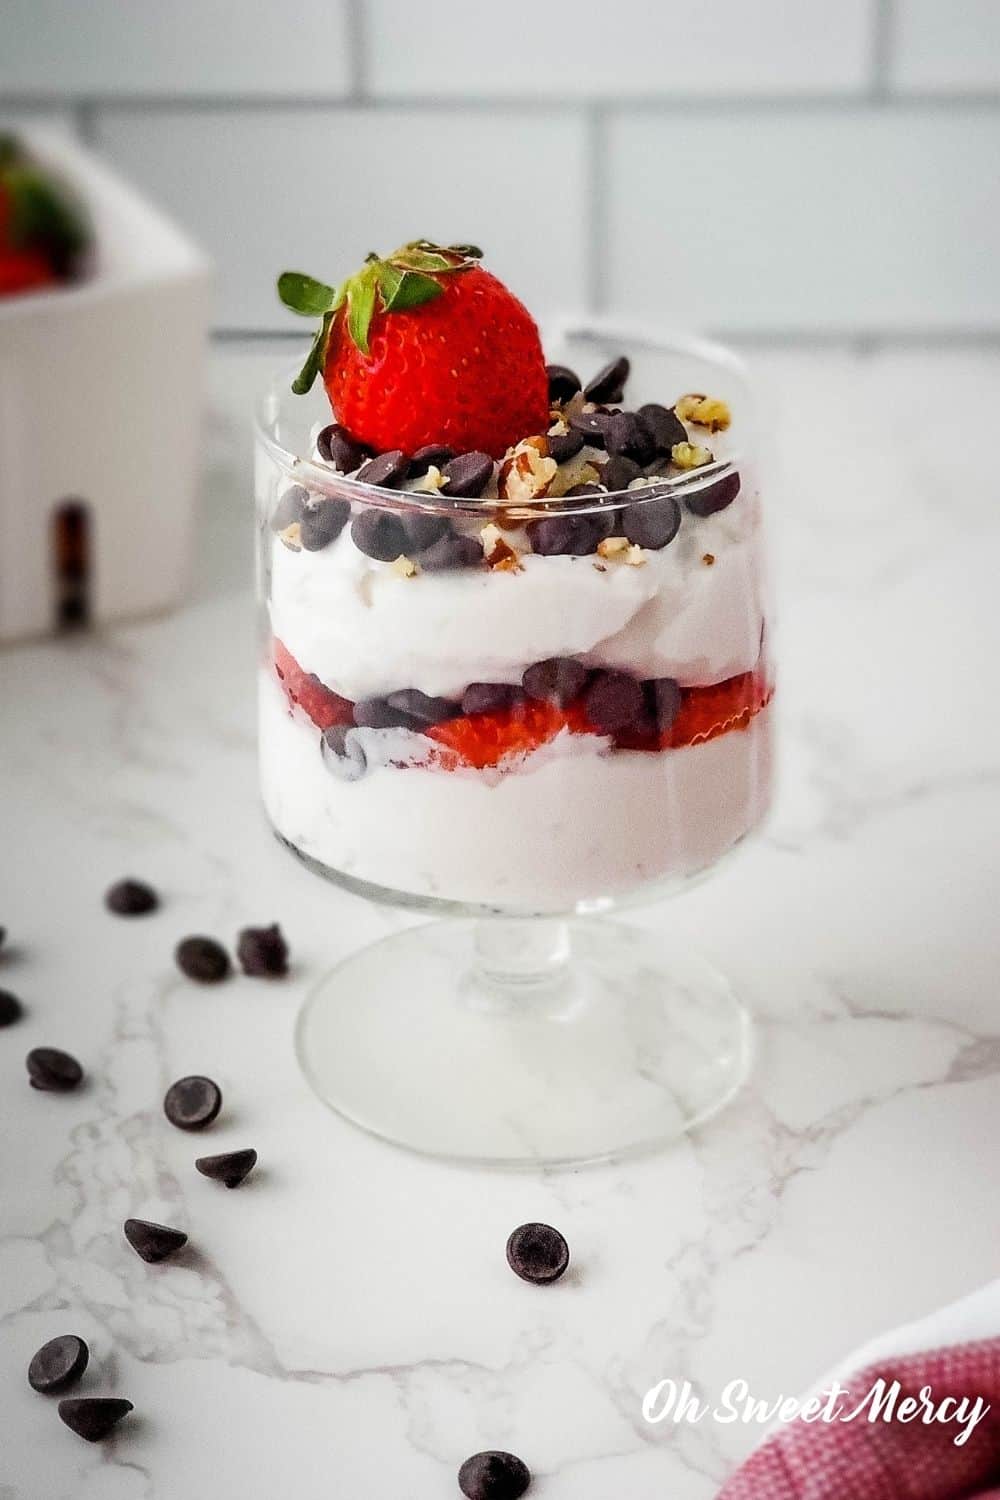 Parfait glass of Special Occasion Chocolate Chip Parfait showing layers of fluffy cream cheese, strawberries, chocolate chips, topped with chocolate chips, a whole strawberry, and sprinkle of pecan pieces